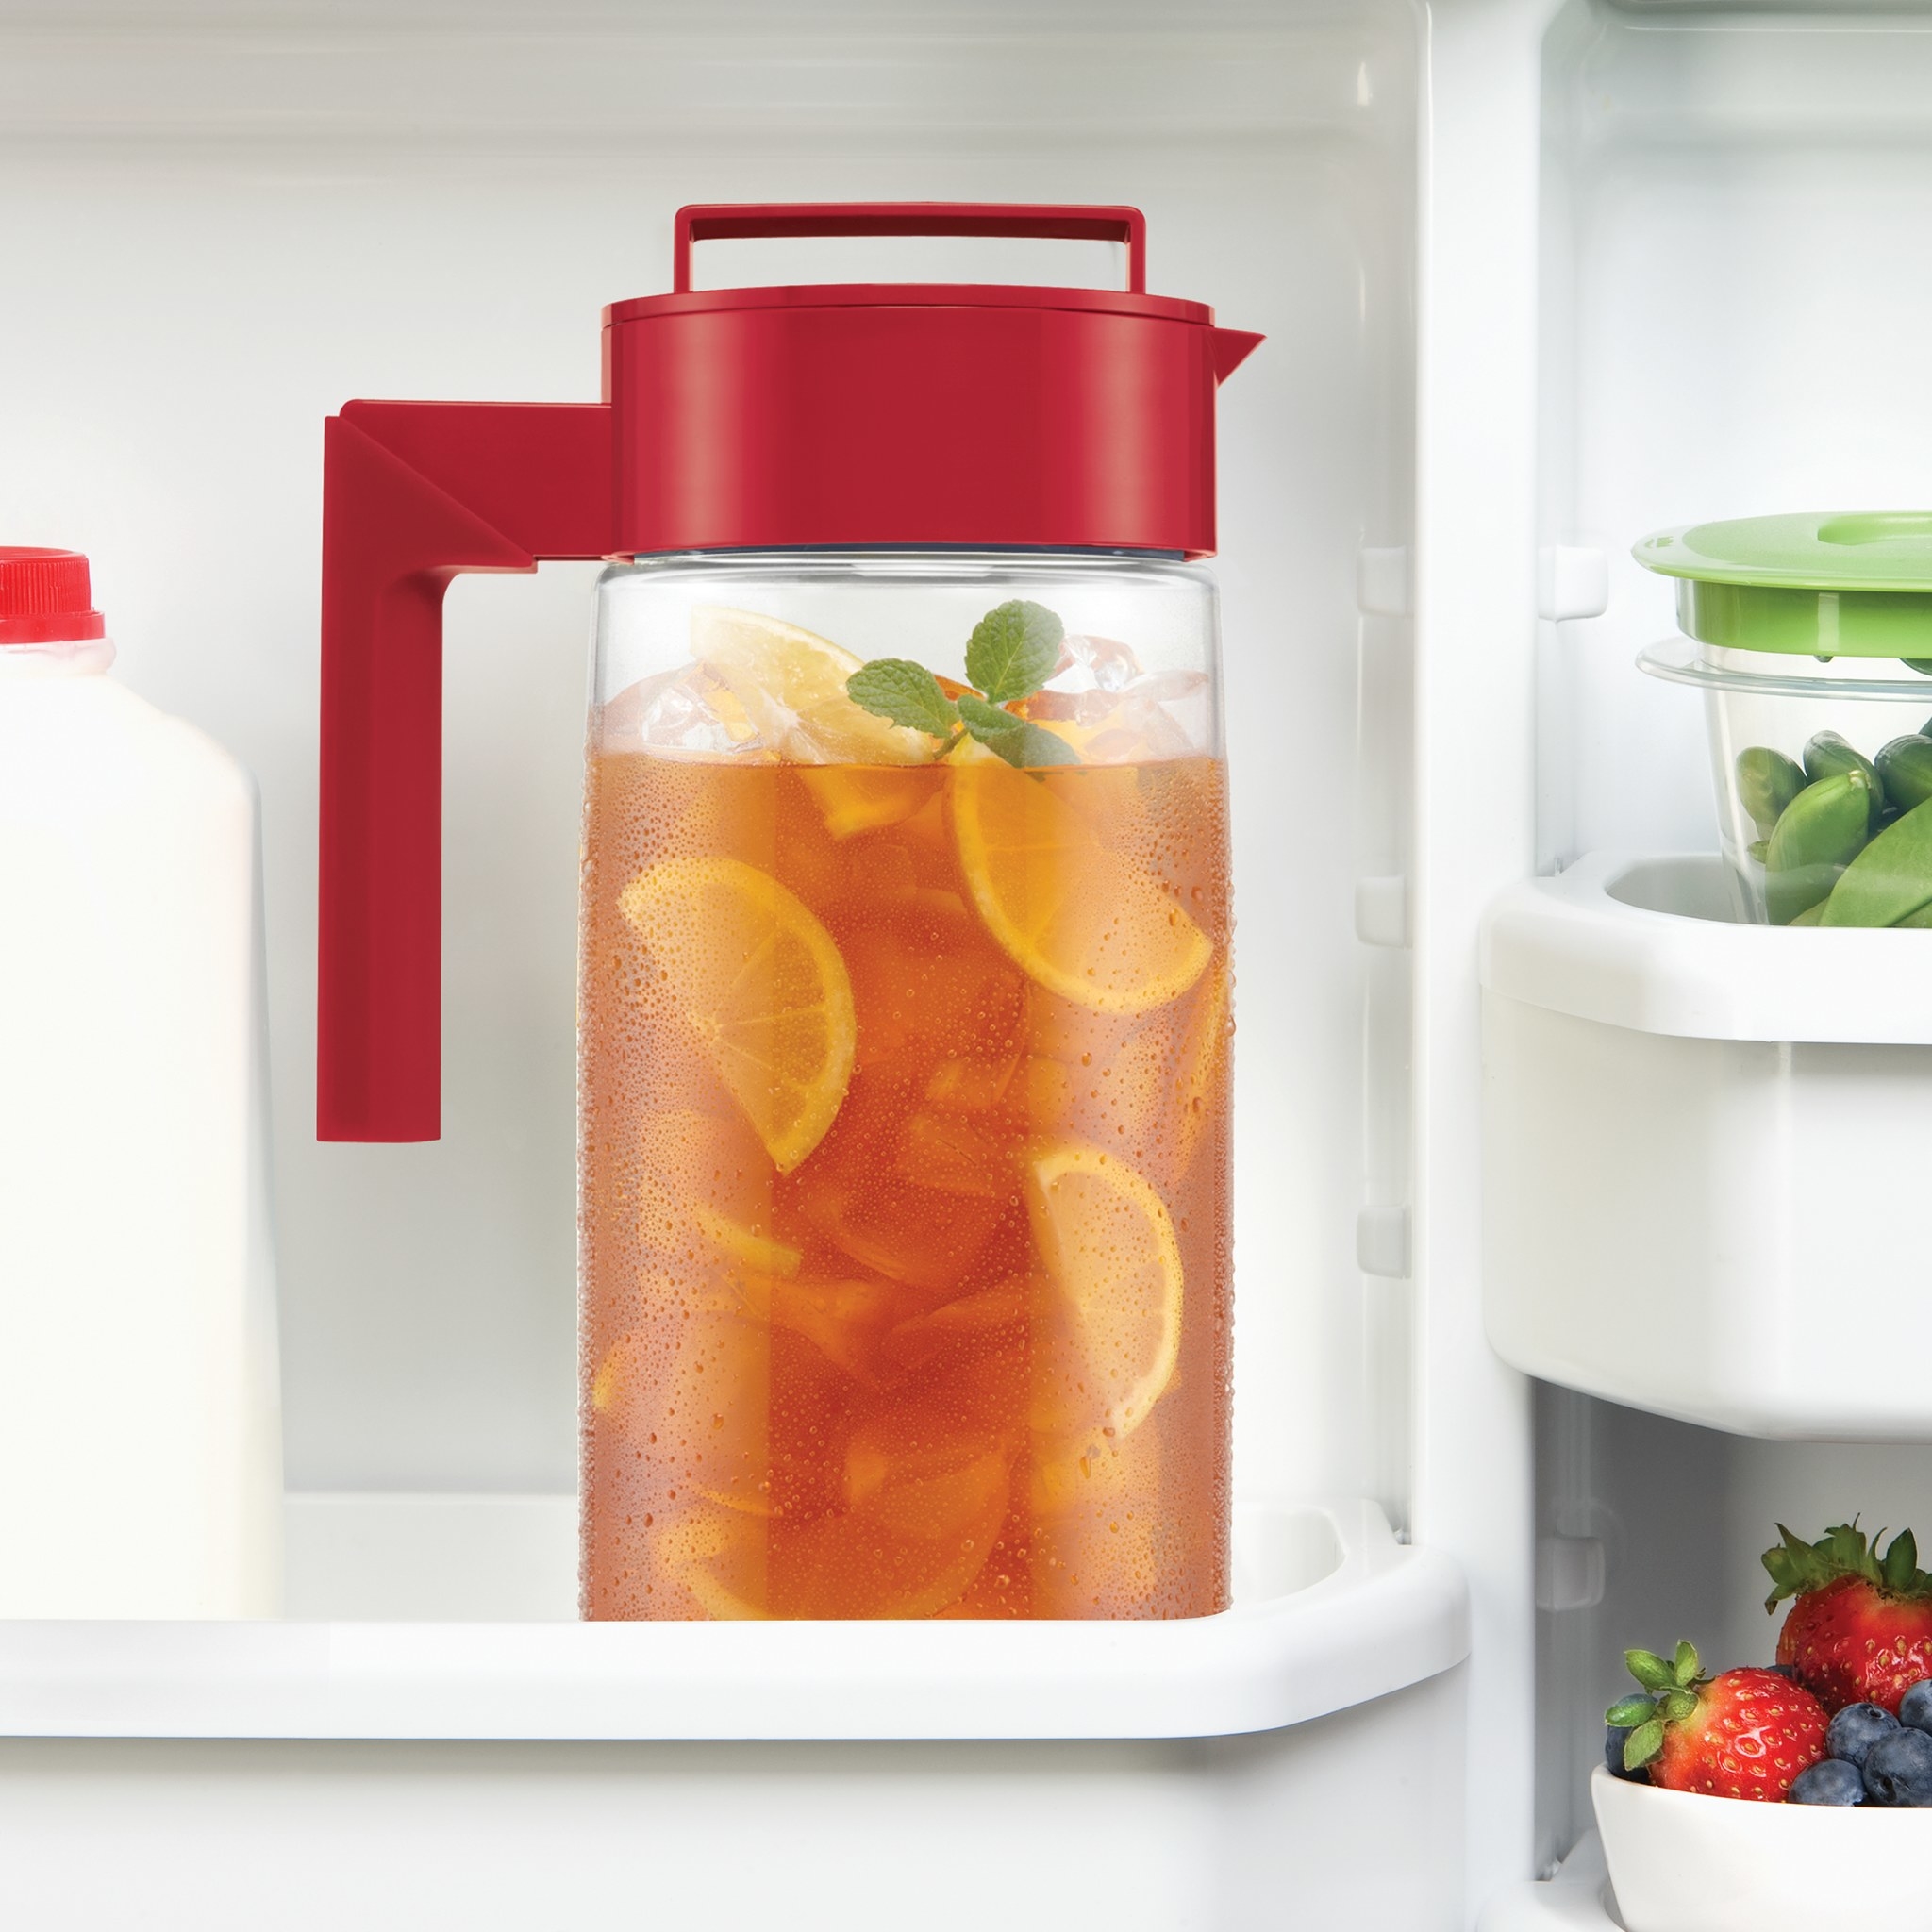 The pitcher, featuring a clear plastic body and red top with handle and pour spout